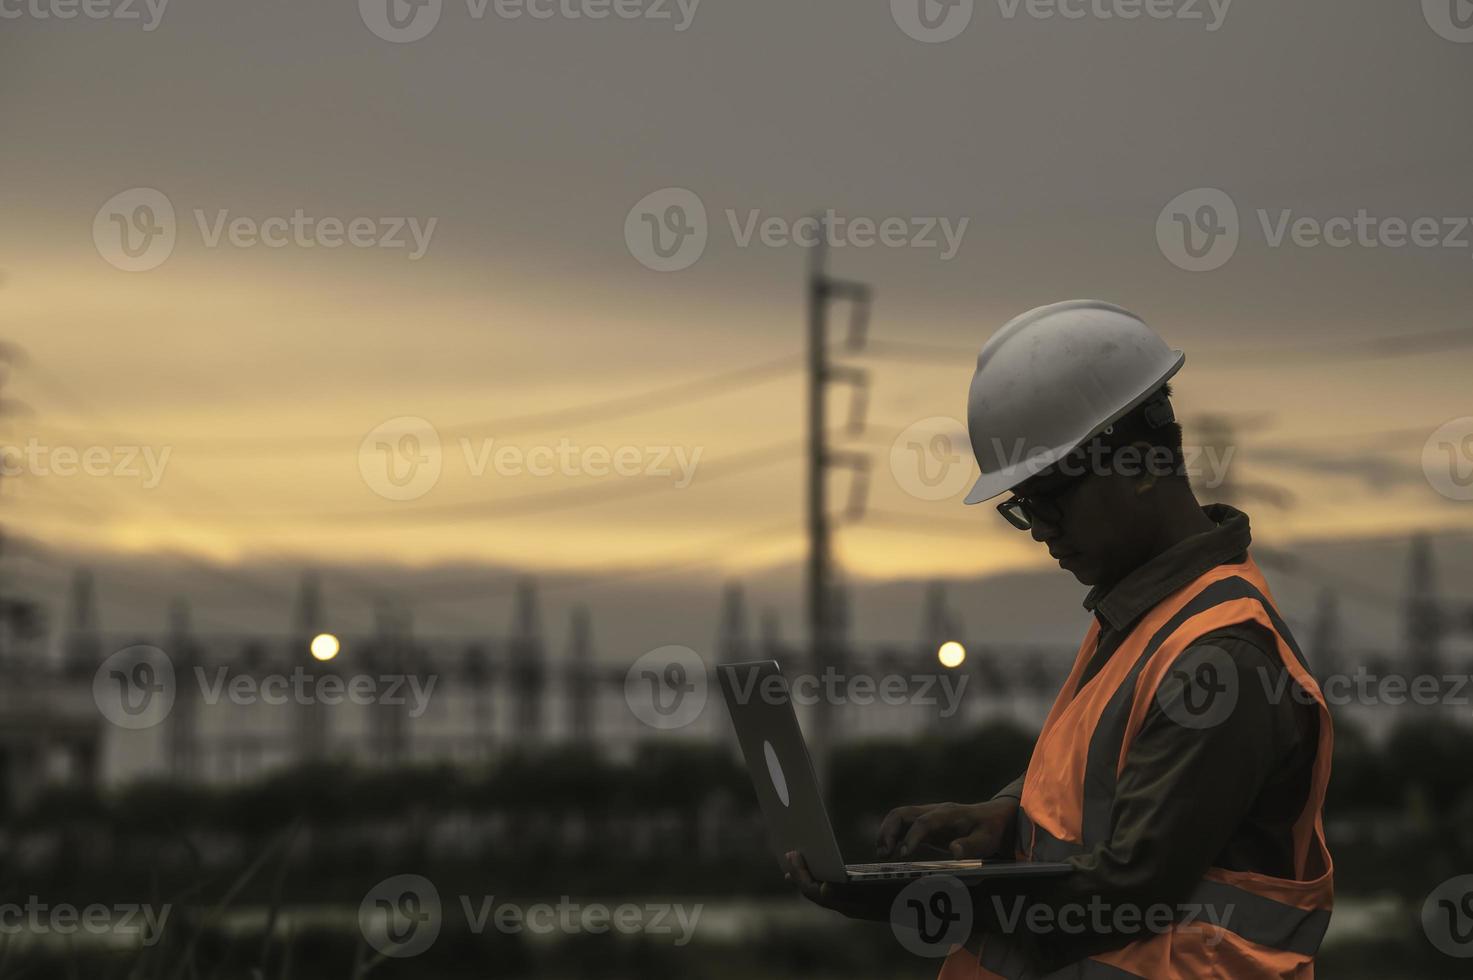 Asian engineer working at power plant,Thailand people photo